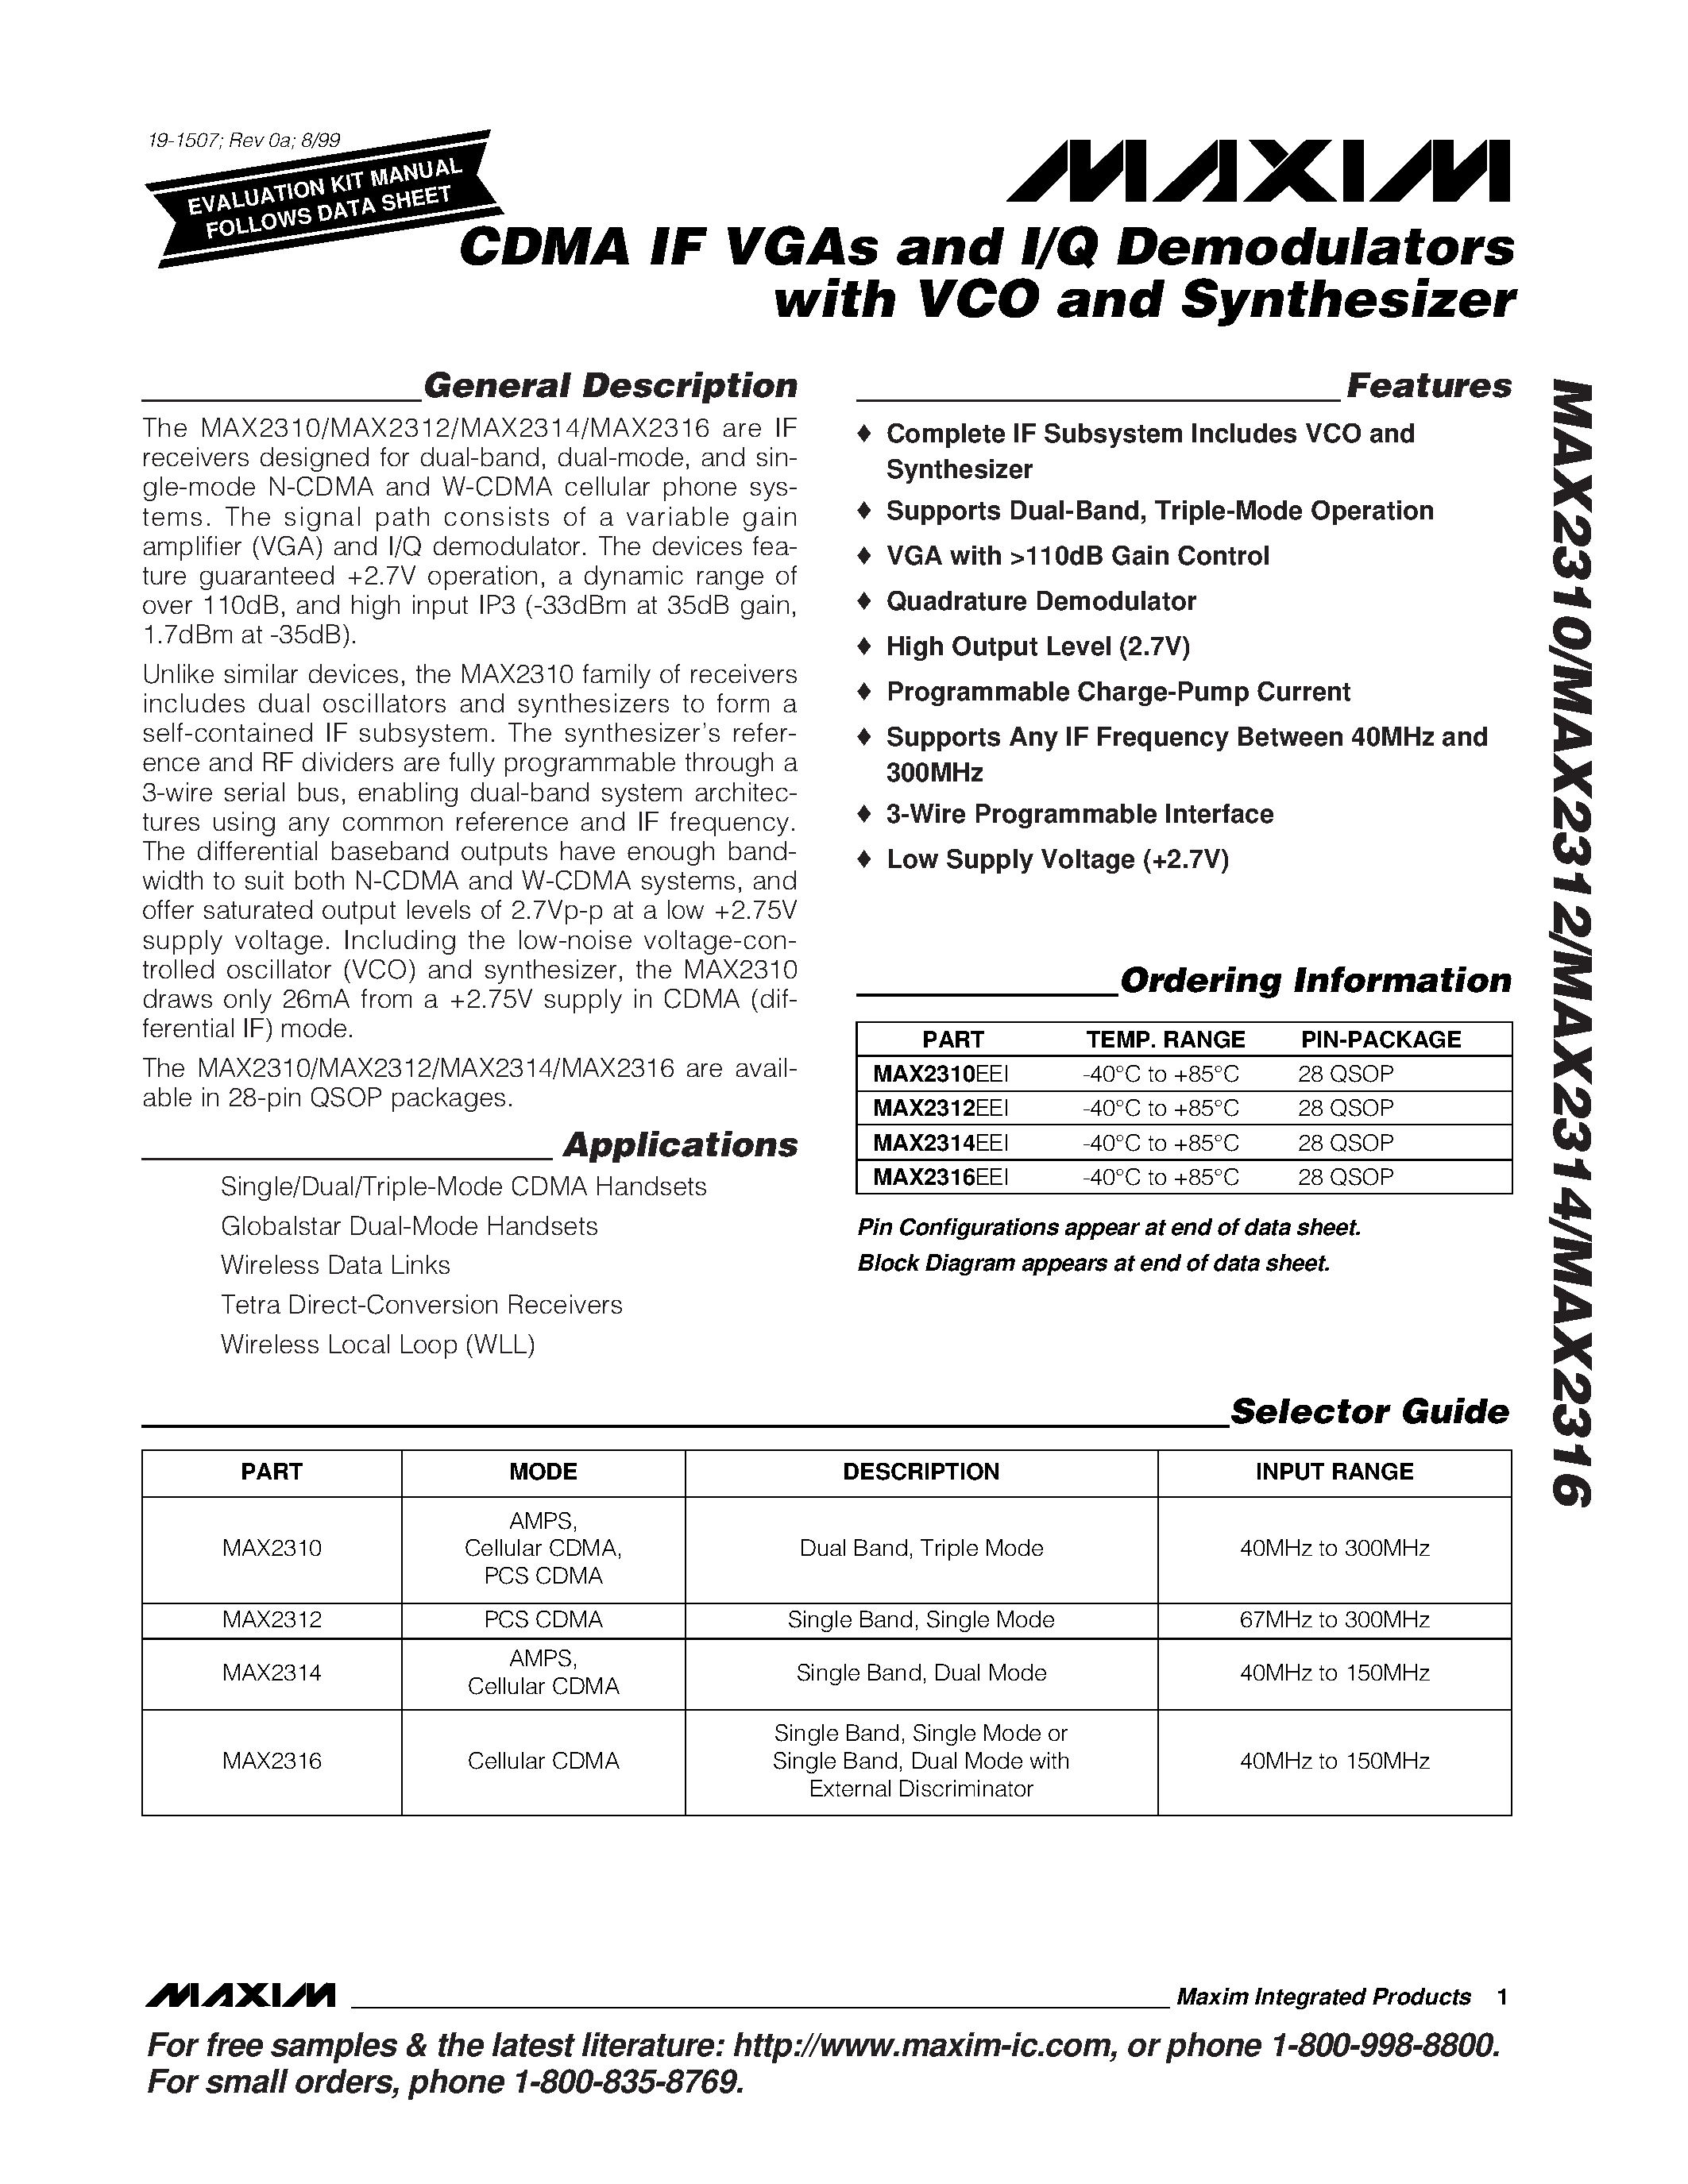 Datasheet MAX2314 - CDMA IF VGAs and I/Q Demodulators with VCO and Synthesizer page 1